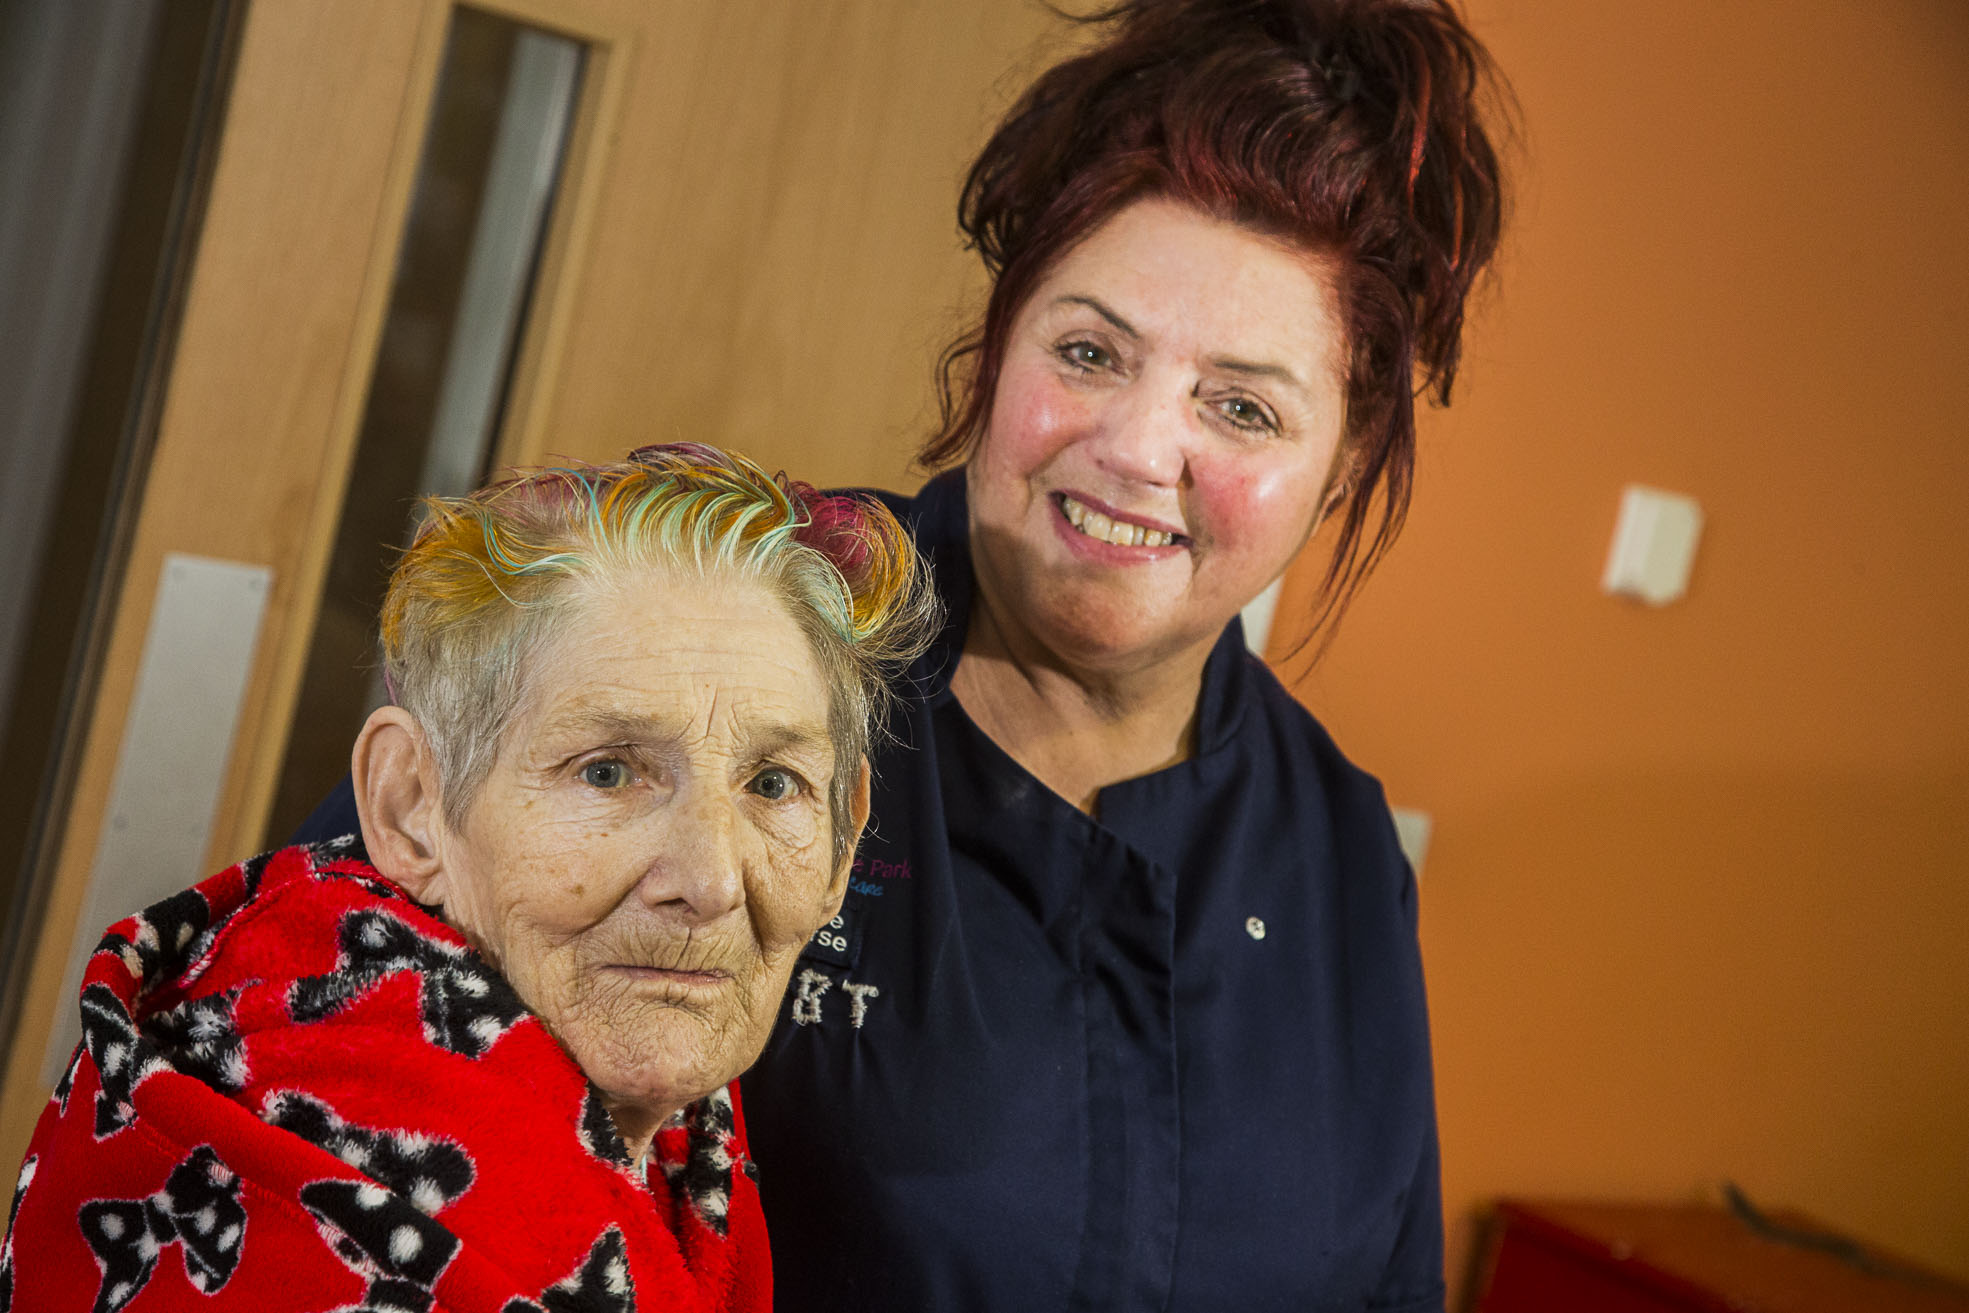 Care home resident Awena, 80, gets multi-coloured new hairdo for Children in Need 